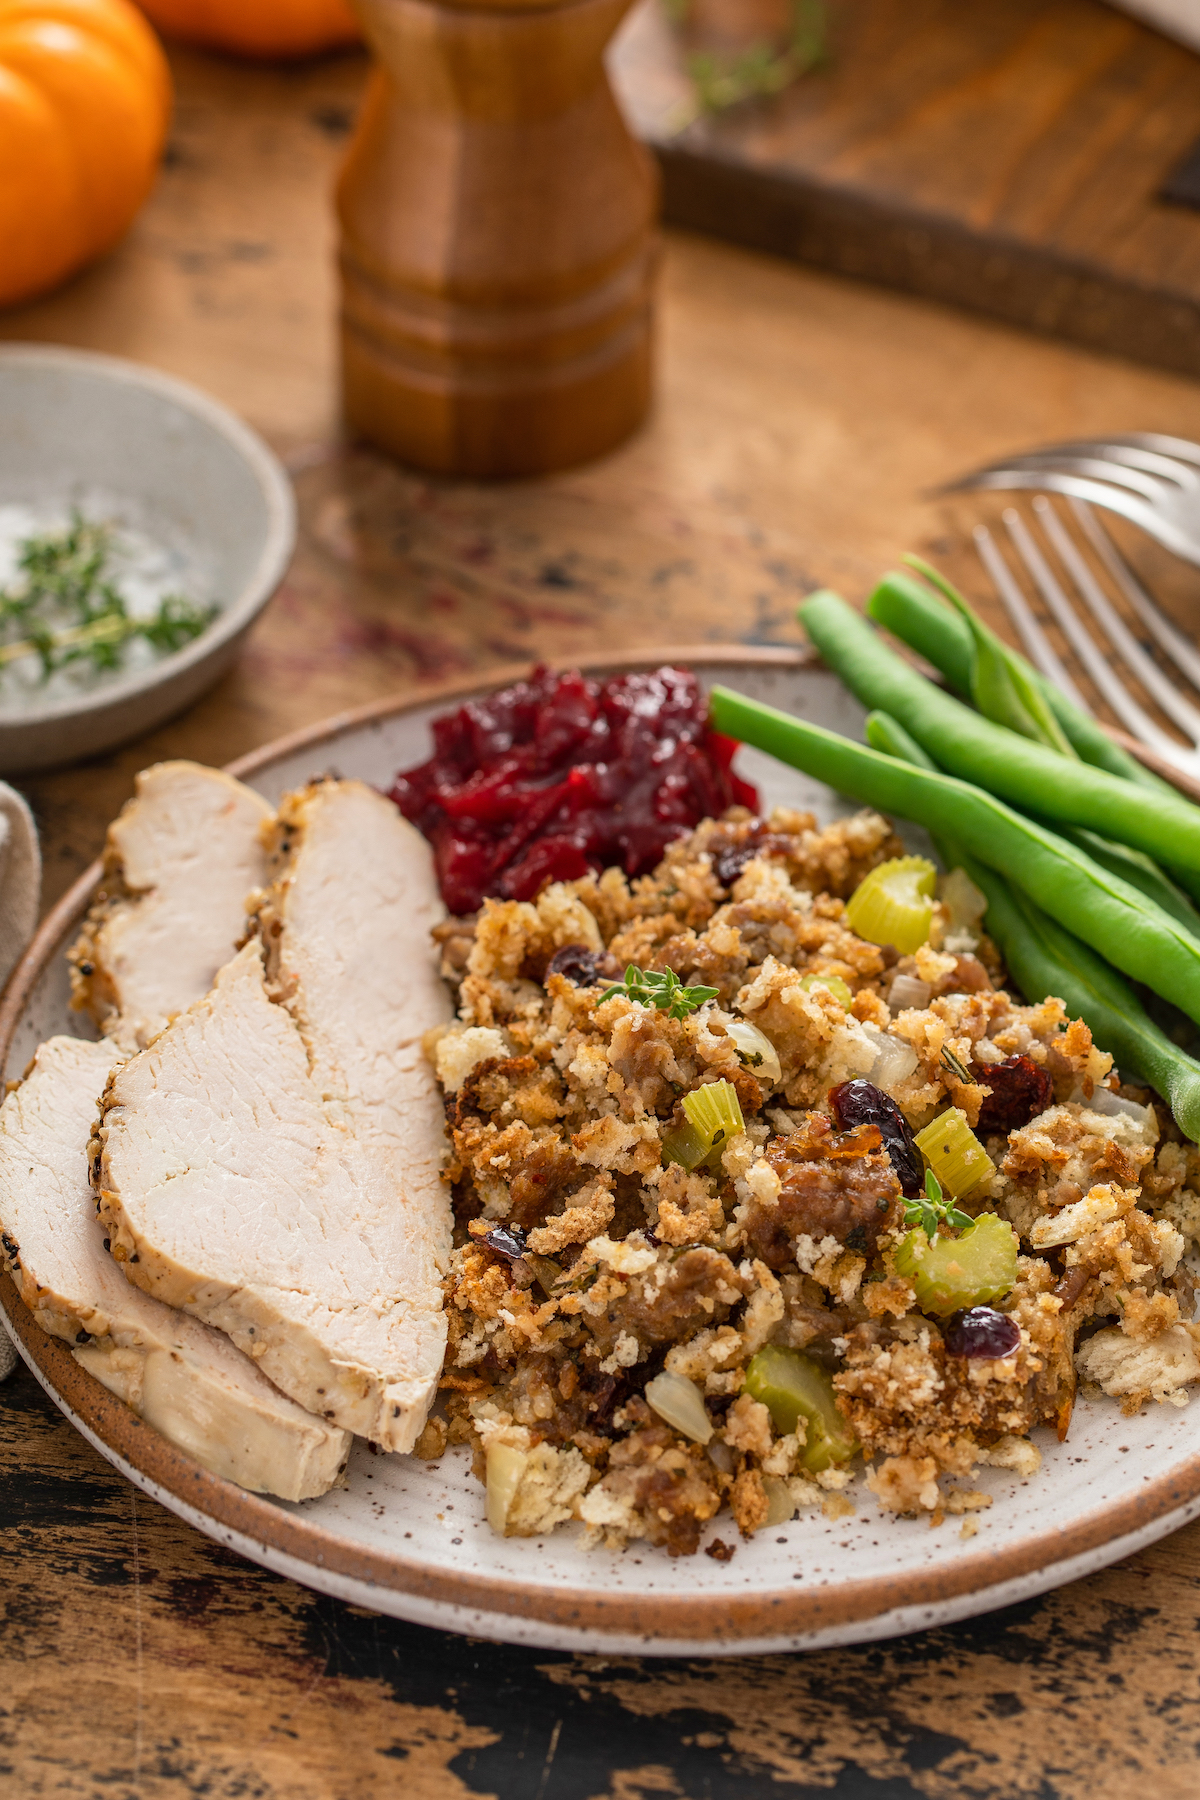 A dinner plate with Thanksgiving turkey and sides.